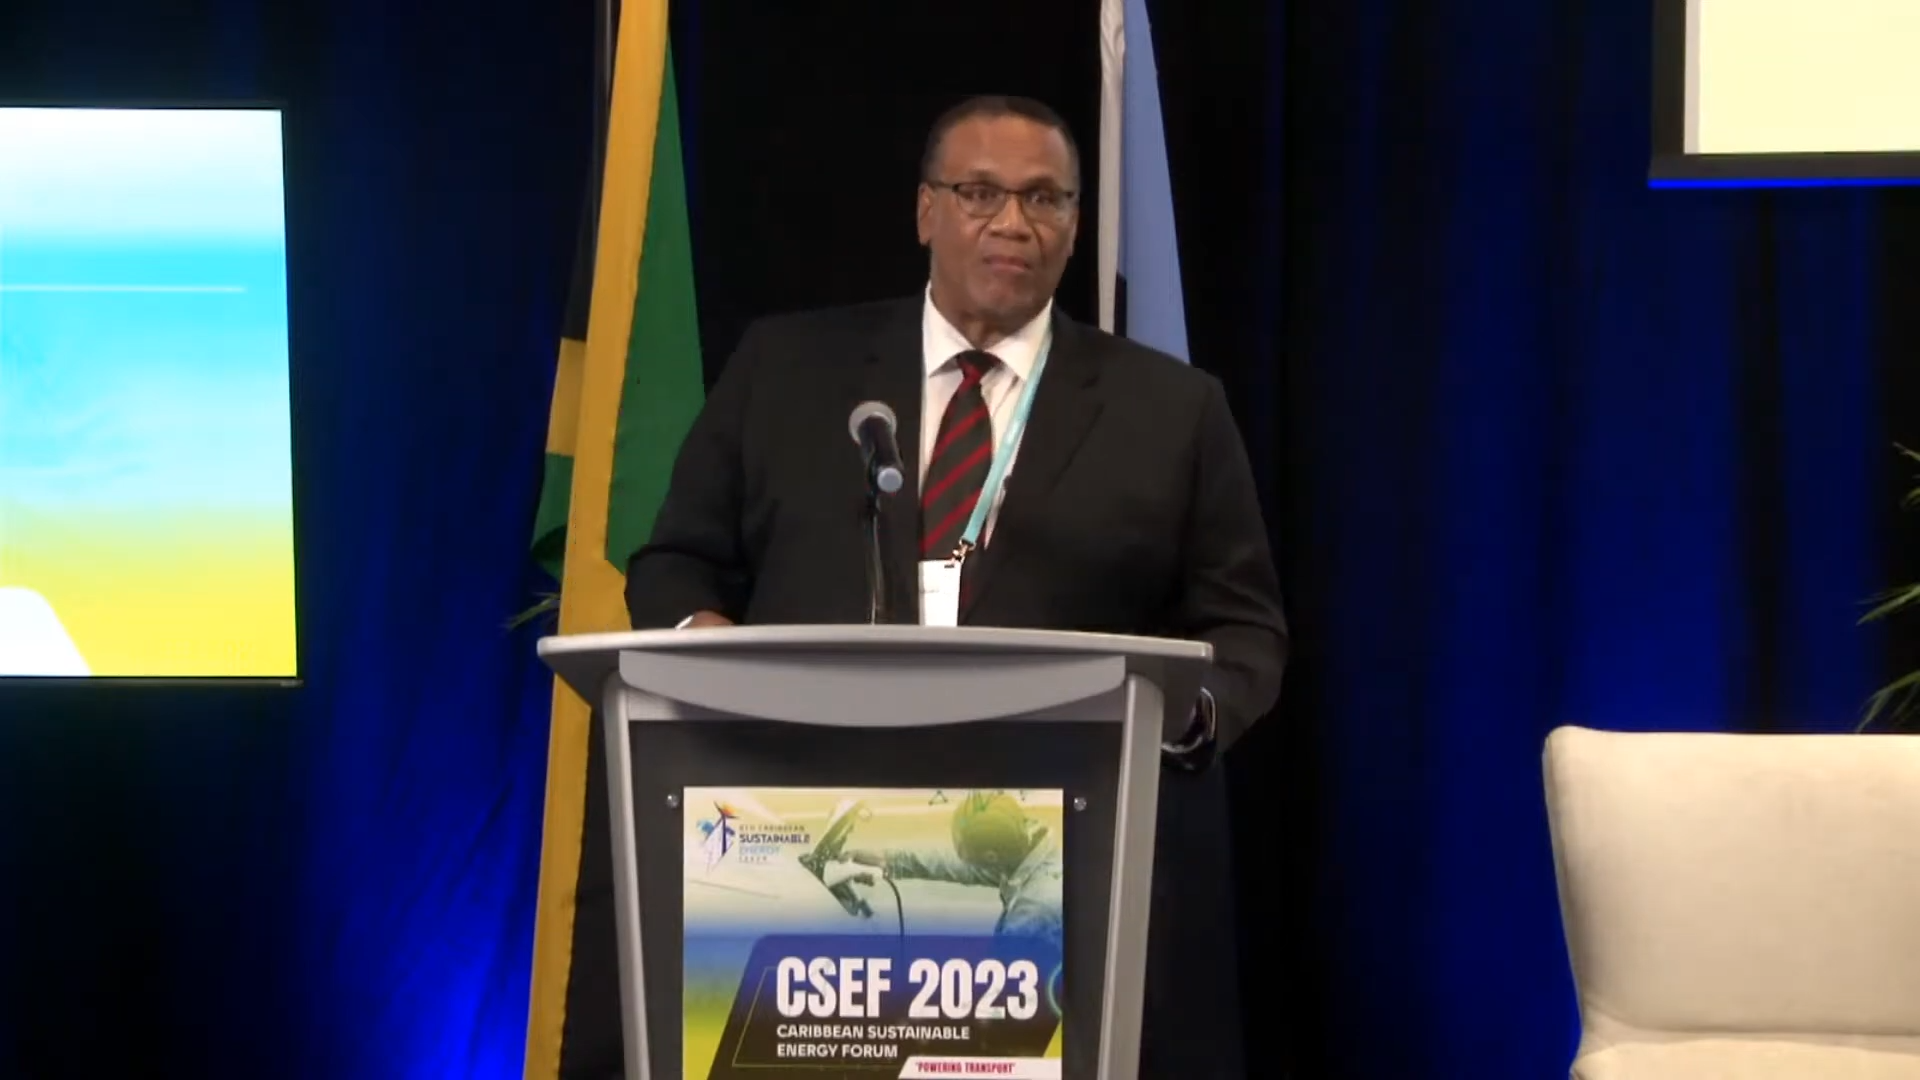 CSEF8 Opens with call for a just transition